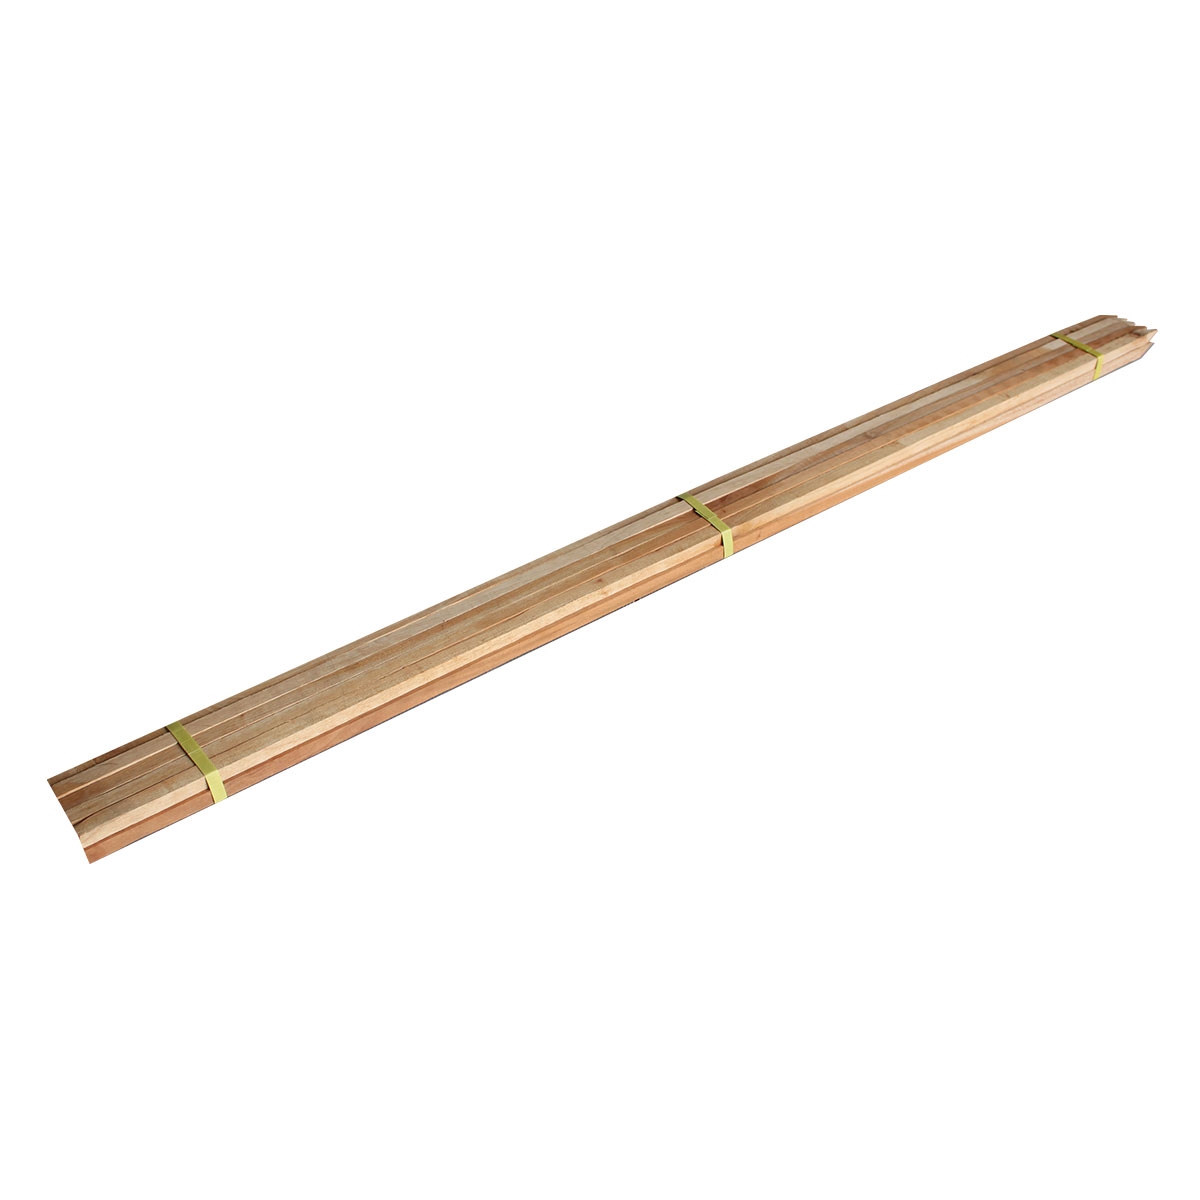 Hardwood Stakes 17 x 17 x 1800mm - 10 Pack